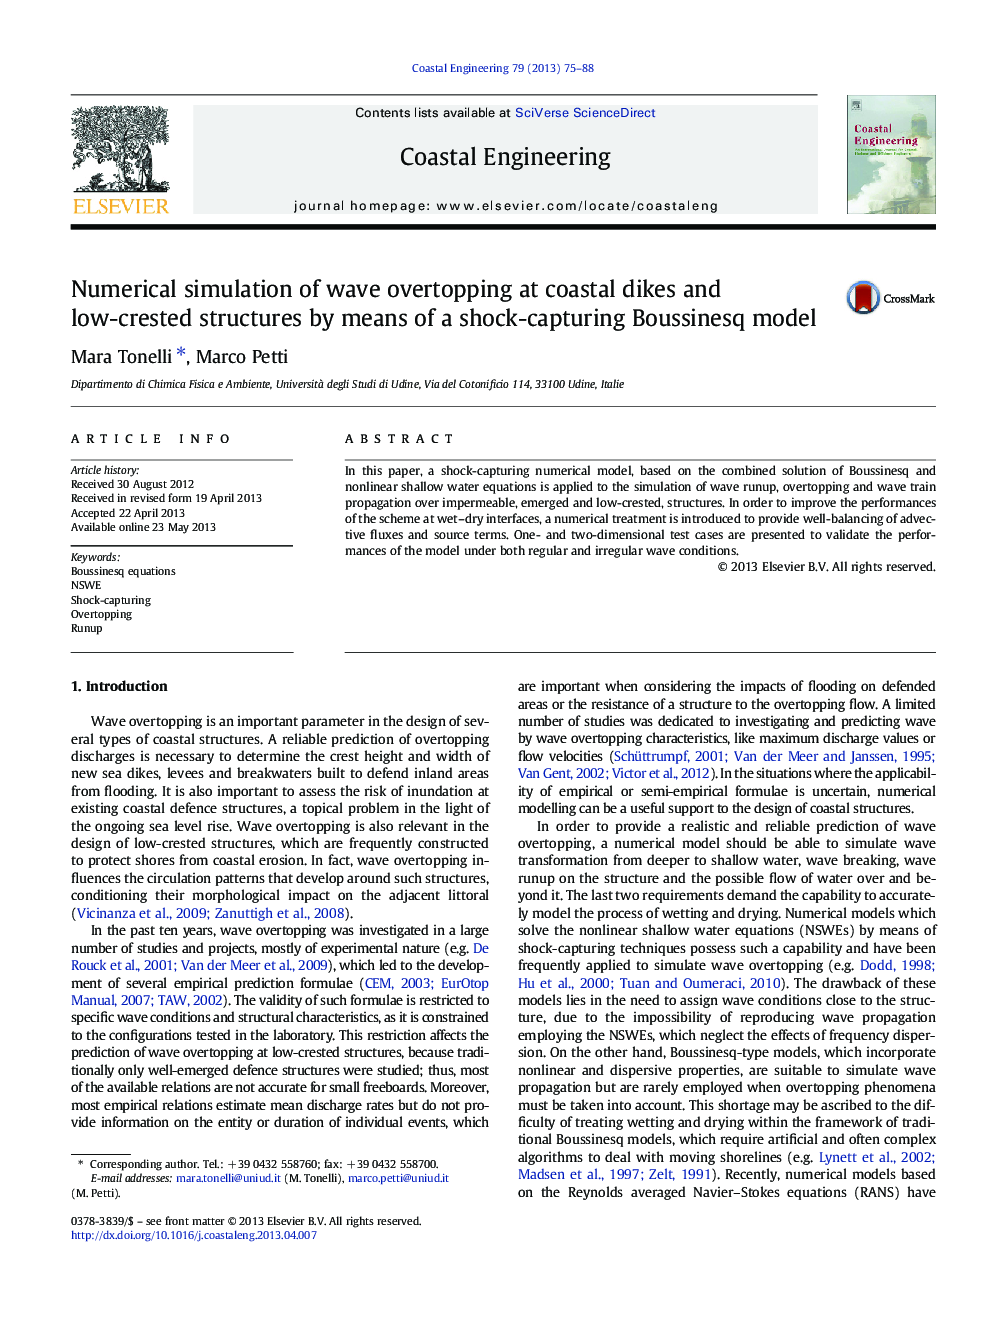 Numerical simulation of wave overtopping at coastal dikes and low-crested structures by means of a shock-capturing Boussinesq model